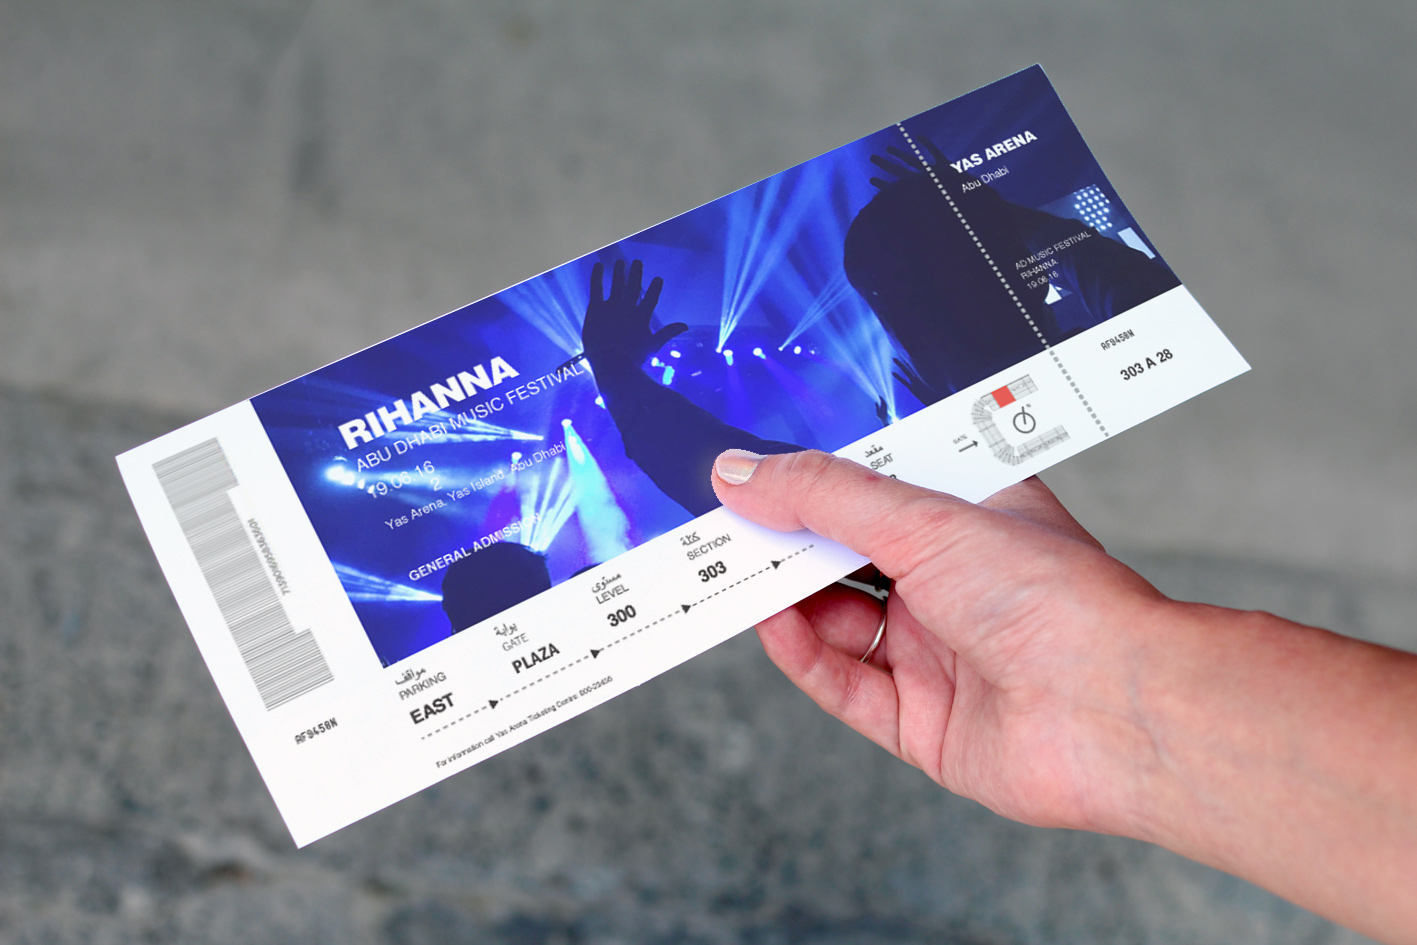 Detailed information on the ticket for the Arena informed by the customer journey.